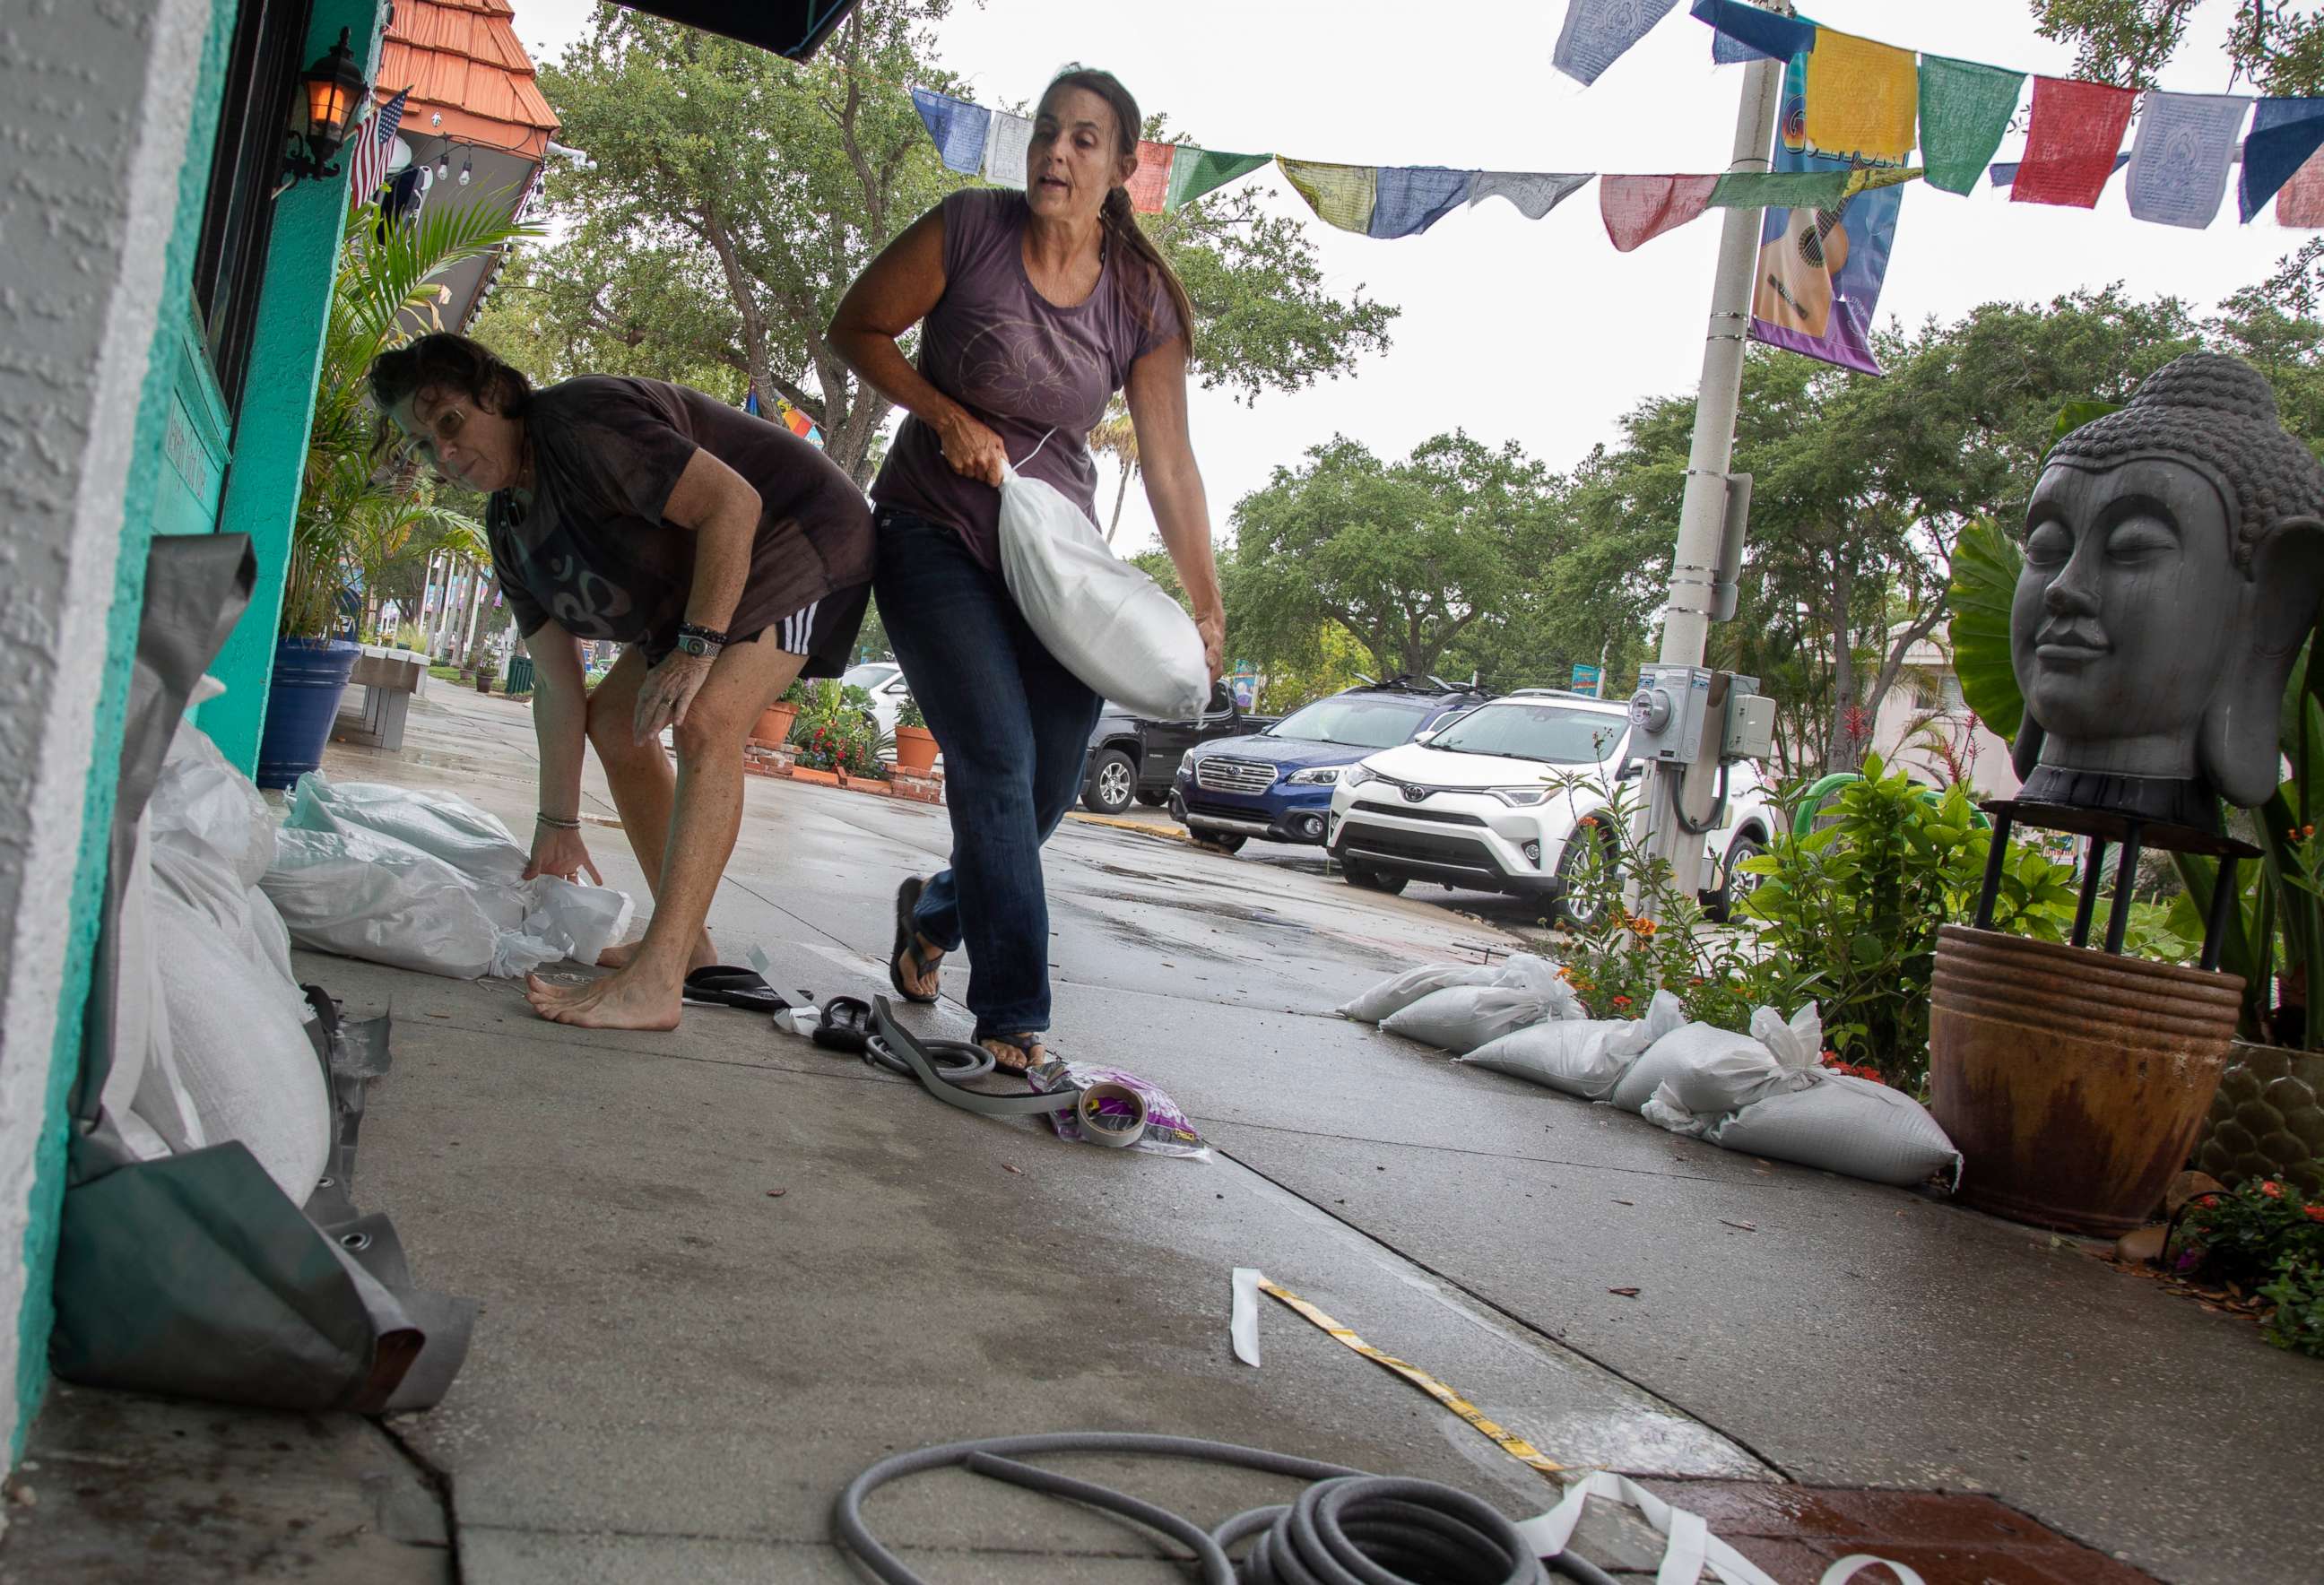 PHOTO: Melissa Loven and Crea Egan place sandbags in front of a store ahead of tropical storm Elsa, July 6, 2021, in Tampa, Fla.